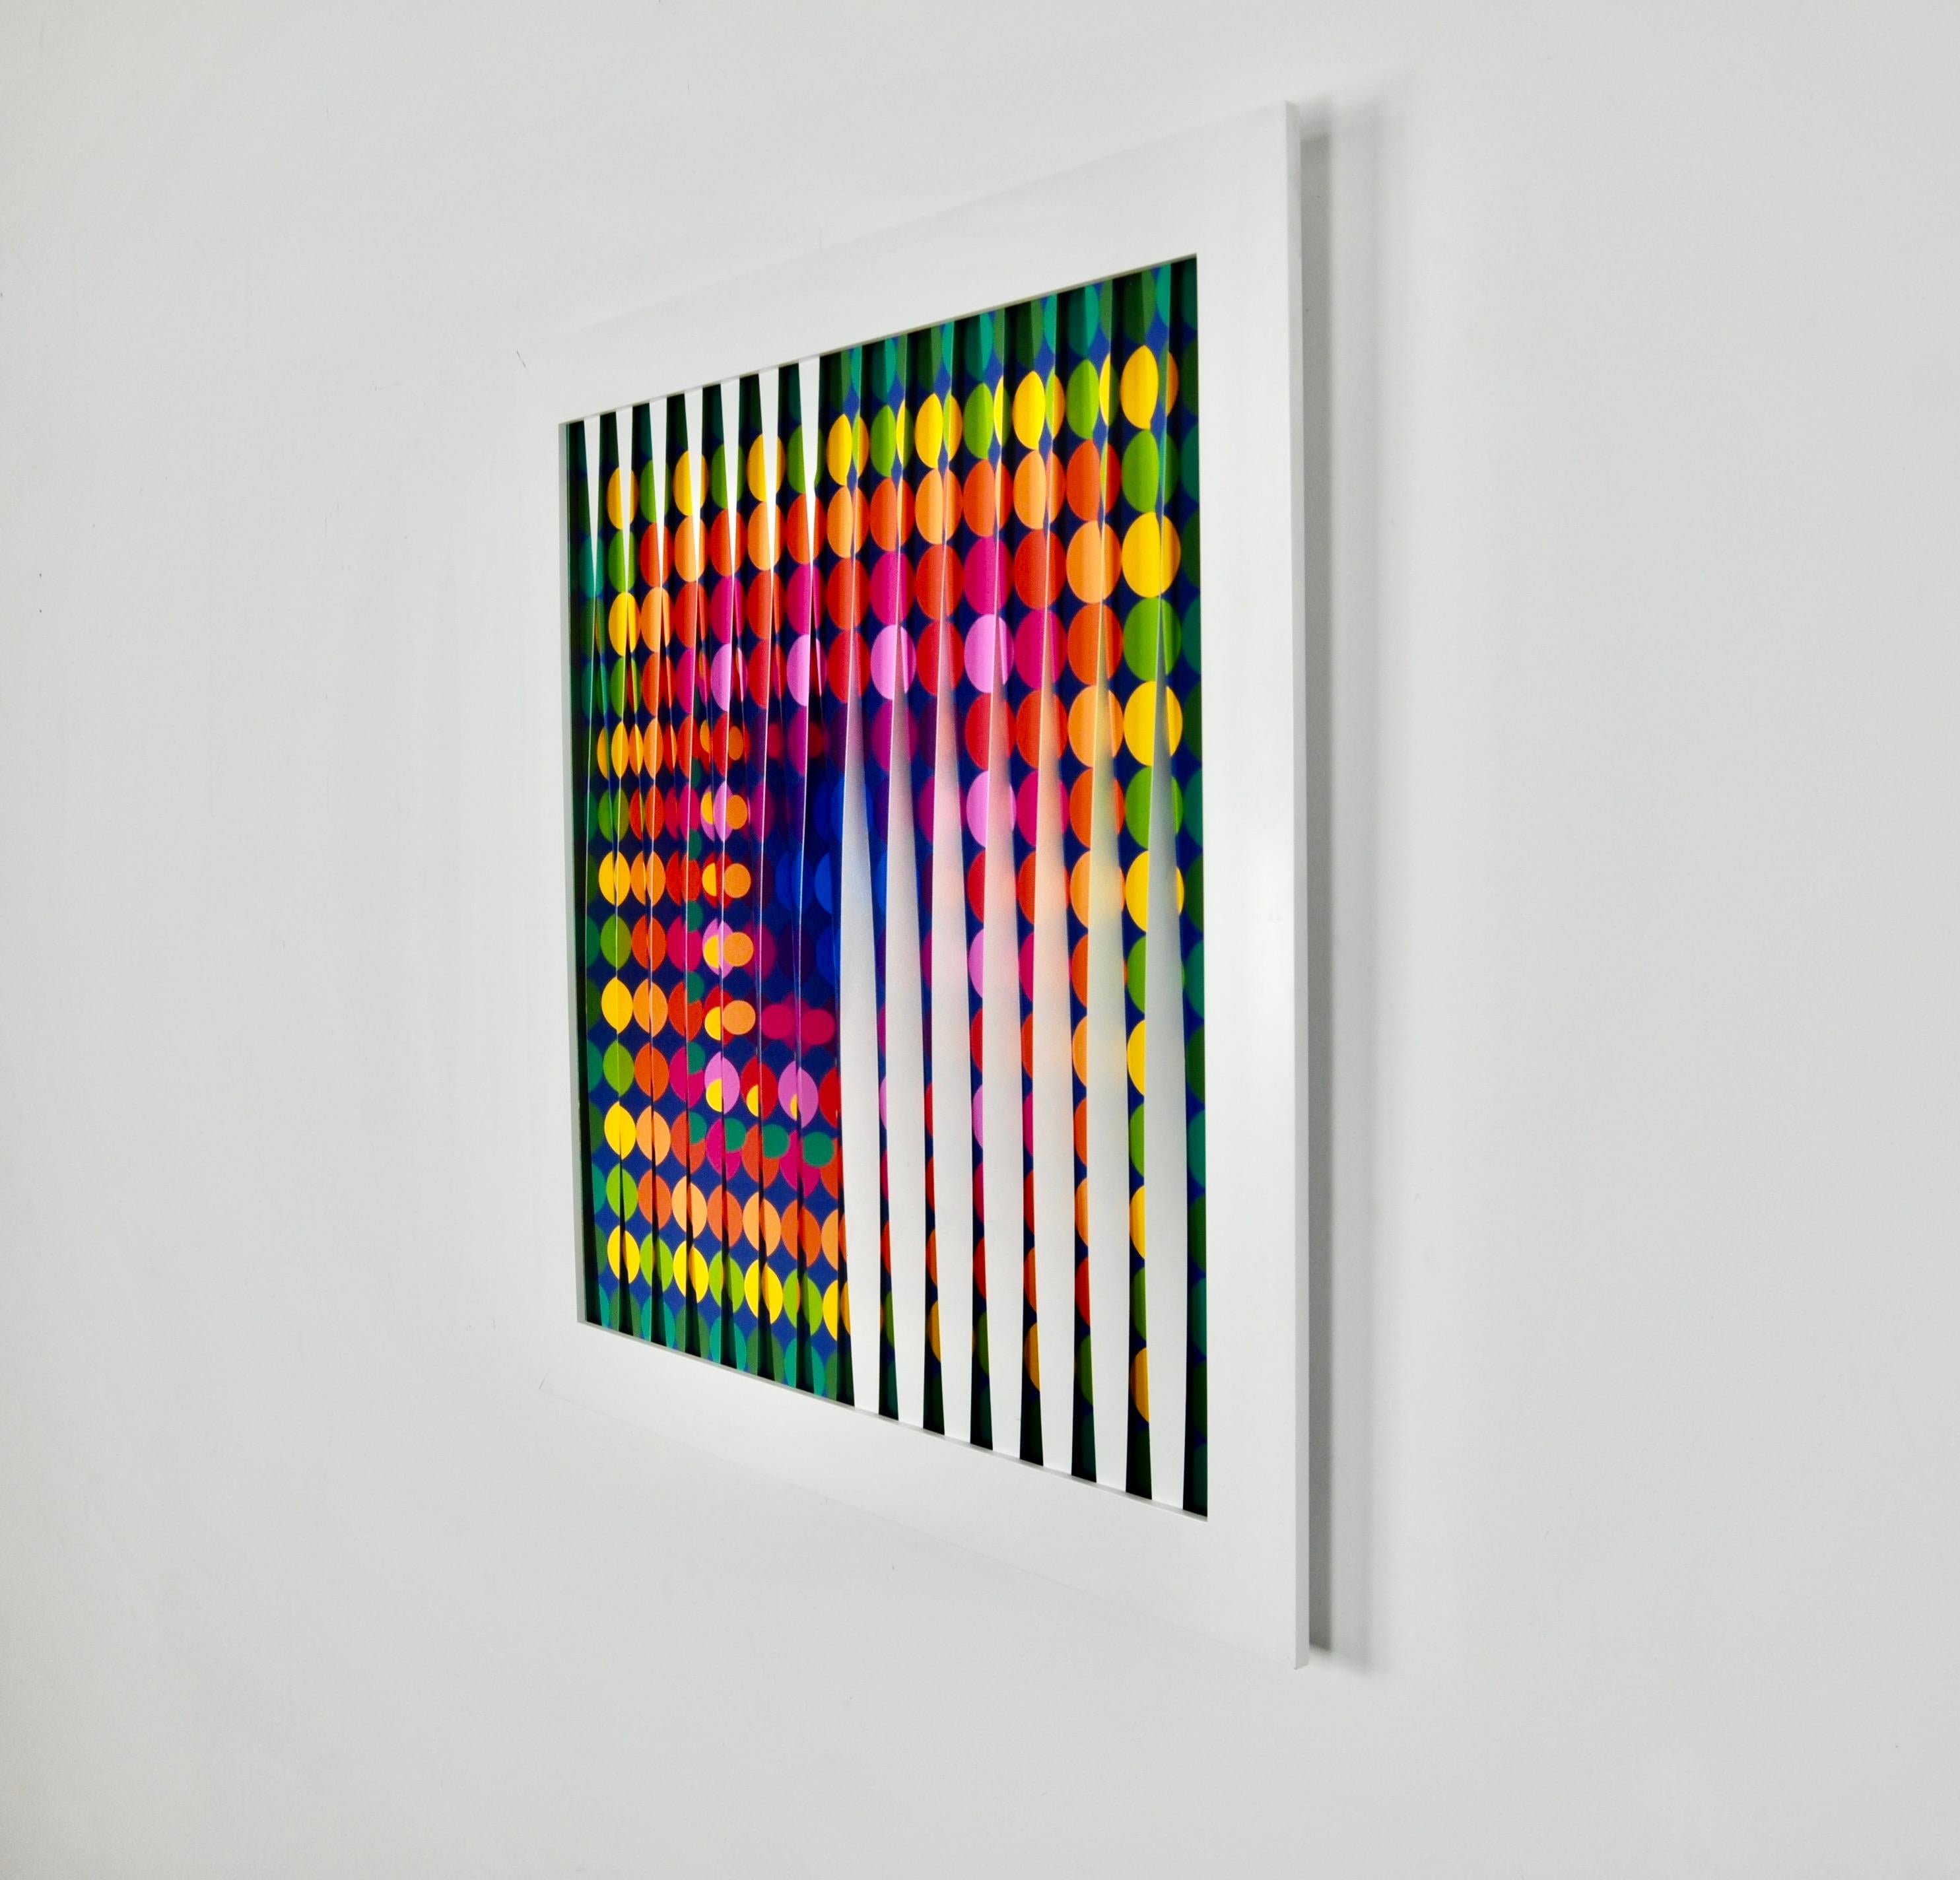 Vasarelly 80 by Michael Scheers In Good Condition For Sale In Lasne, BE